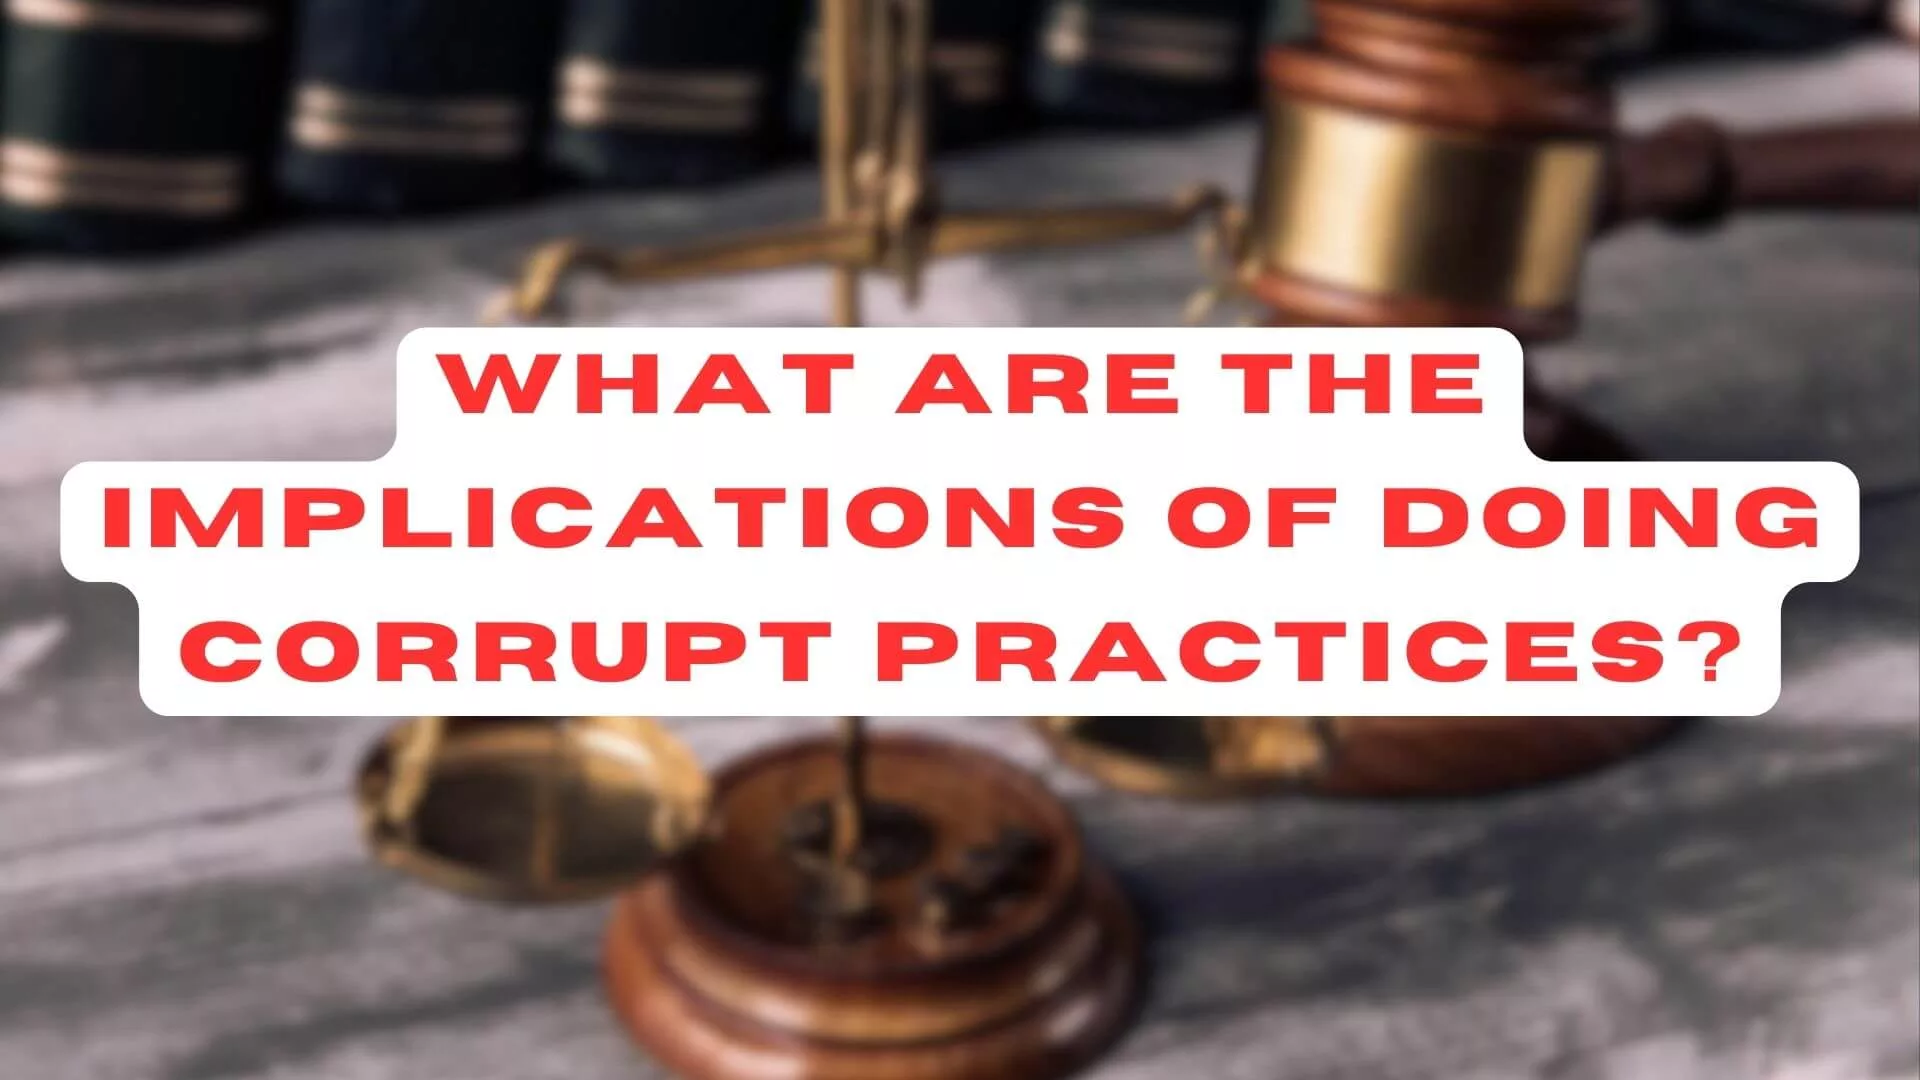 What are the Implications of Doing Corrupt Practices?